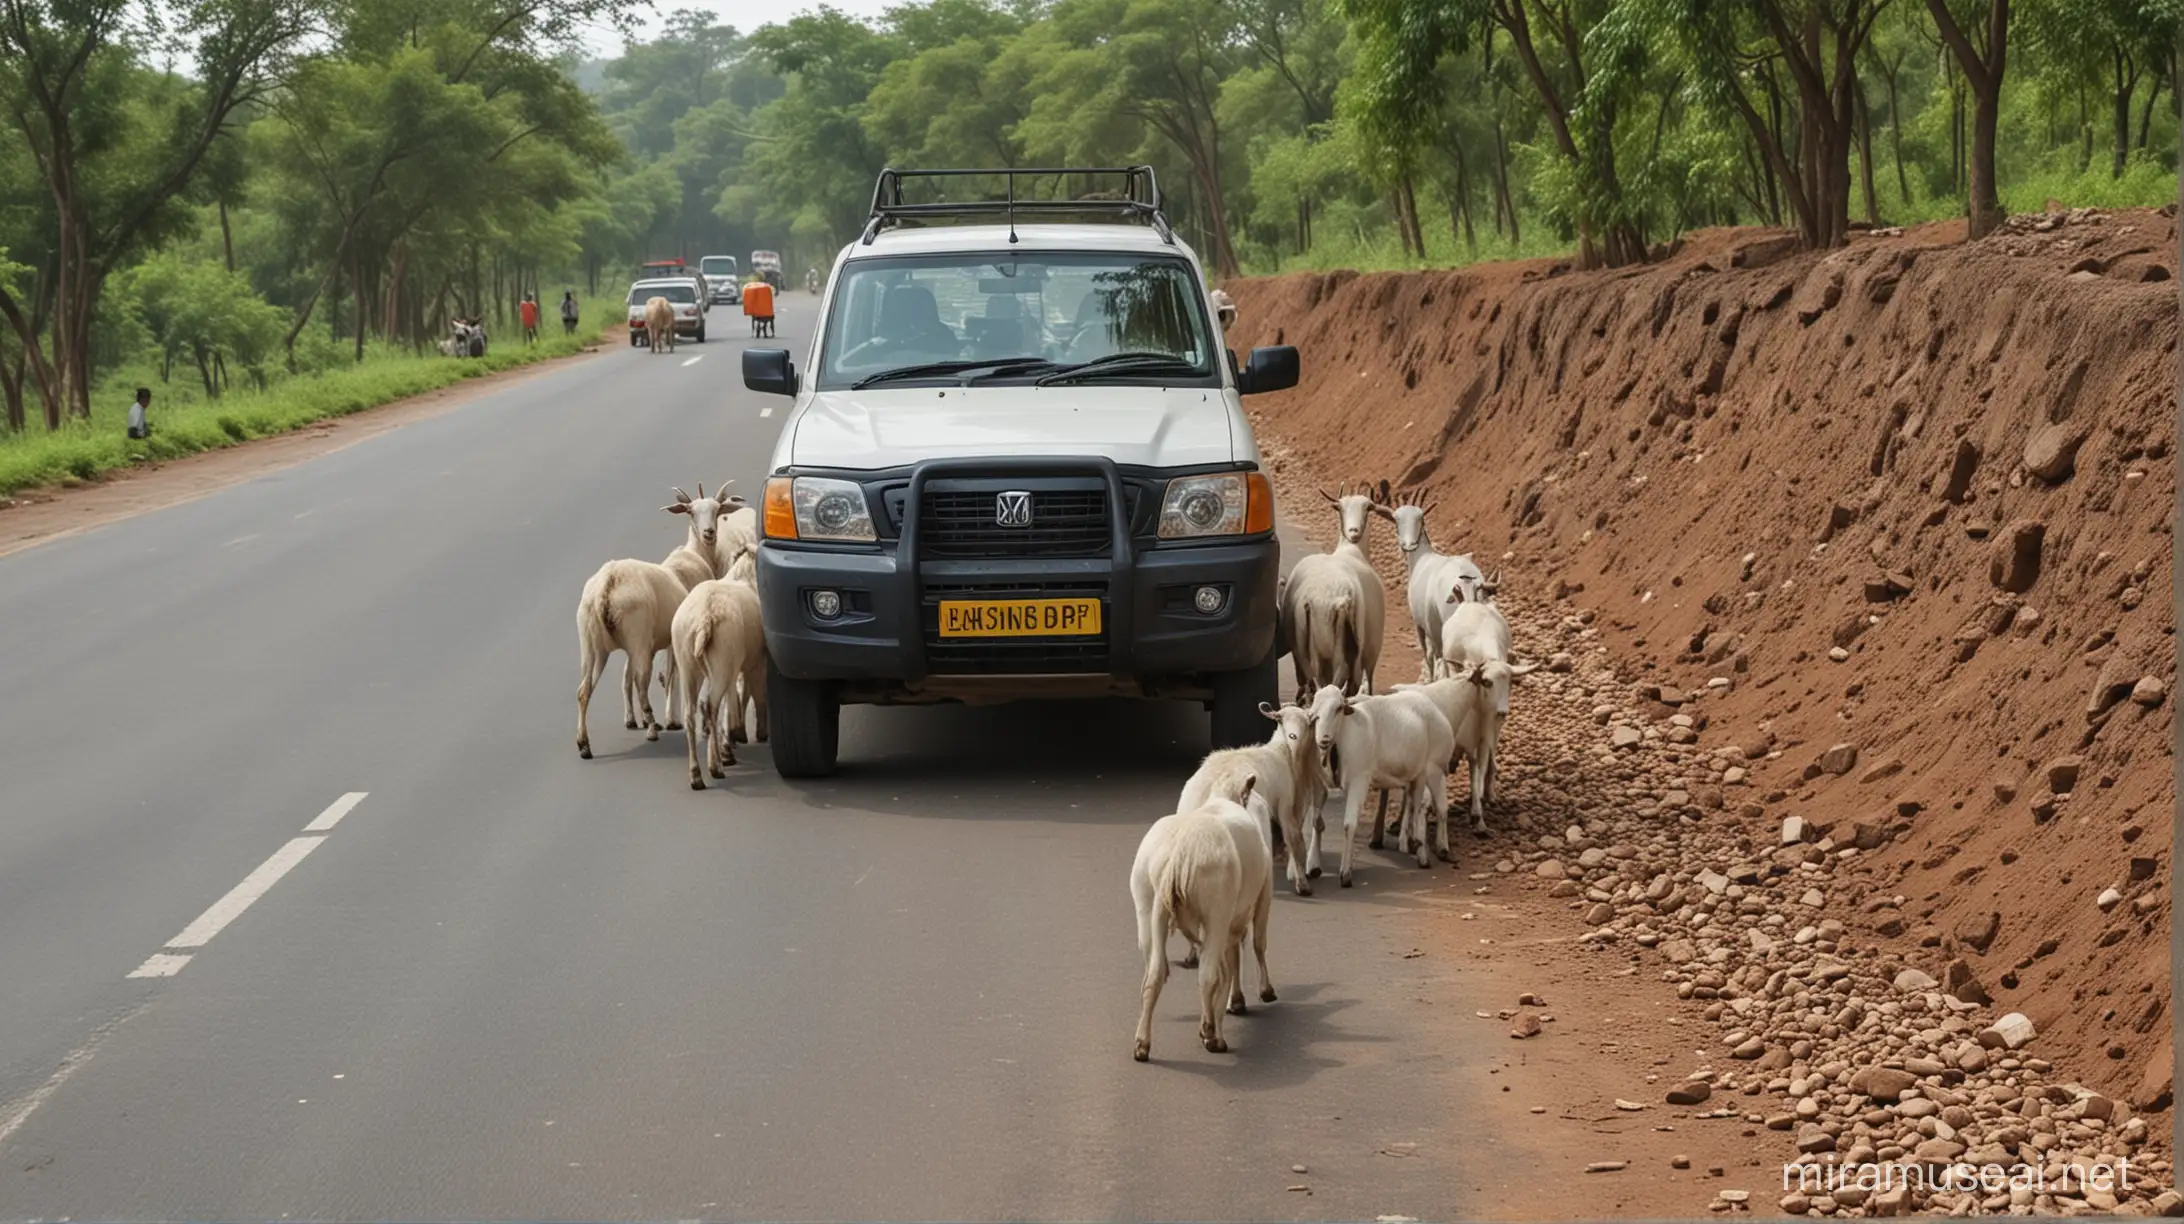 goats are in Mahindra Scorpio car, indian road, shot from behind